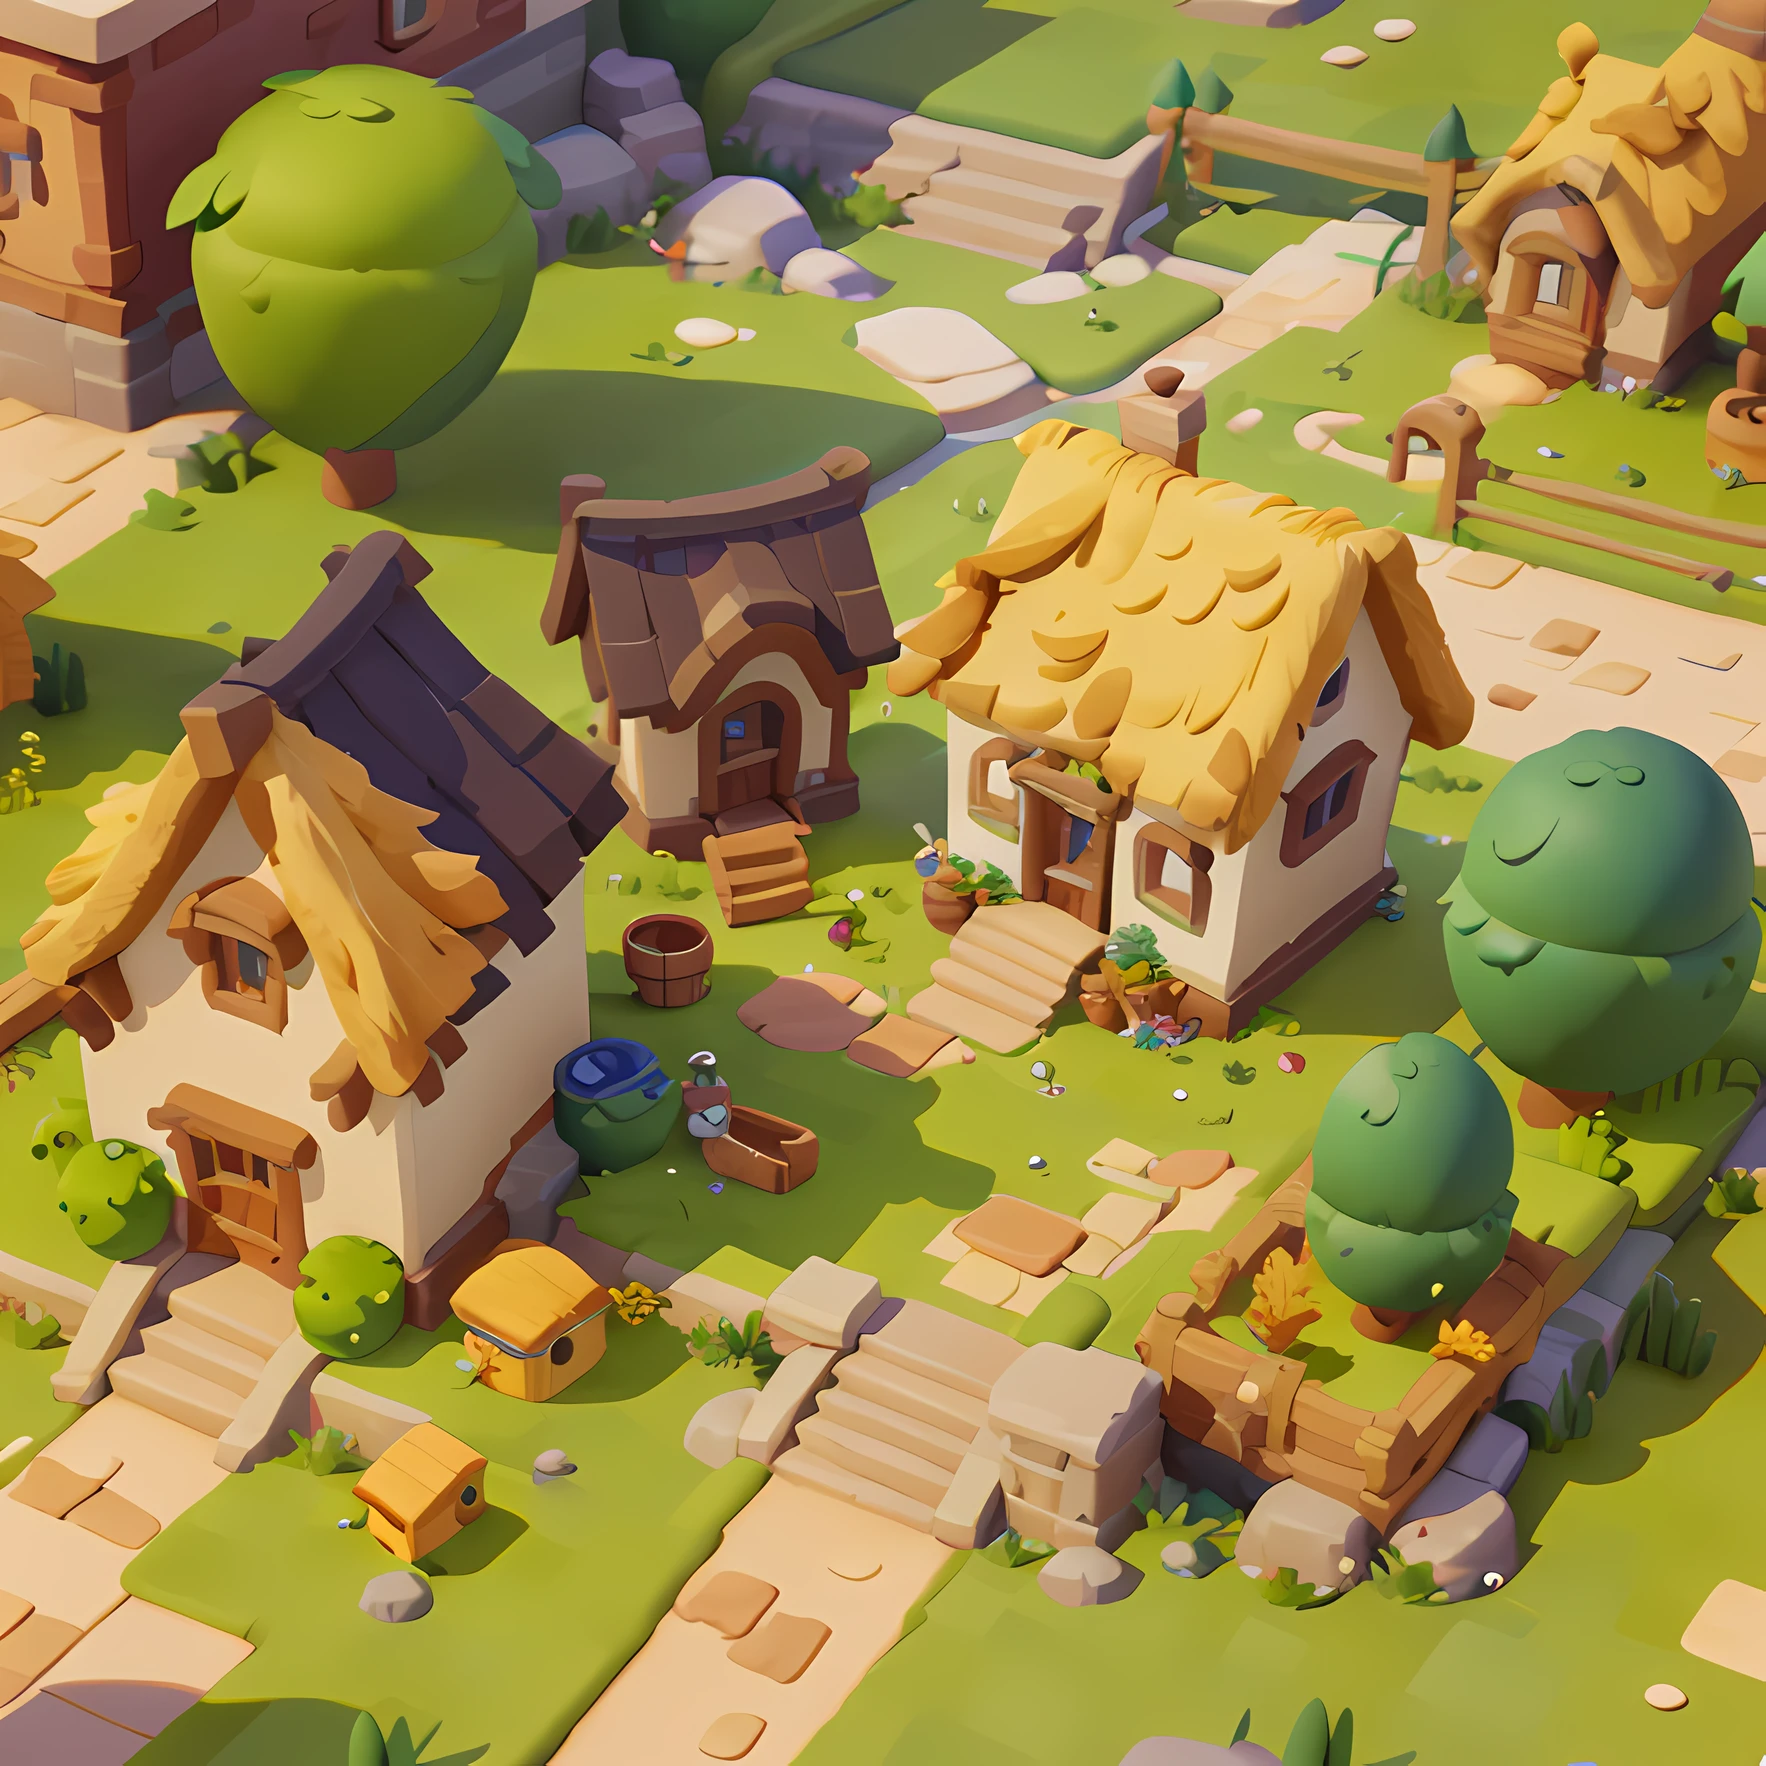 Game architecture design, cartoon, farm, stone, brick, grass, river, flowers, vegetables, wheat, trees, animals, casual play style, 3d, blender, masterpiece, super detail, best quality